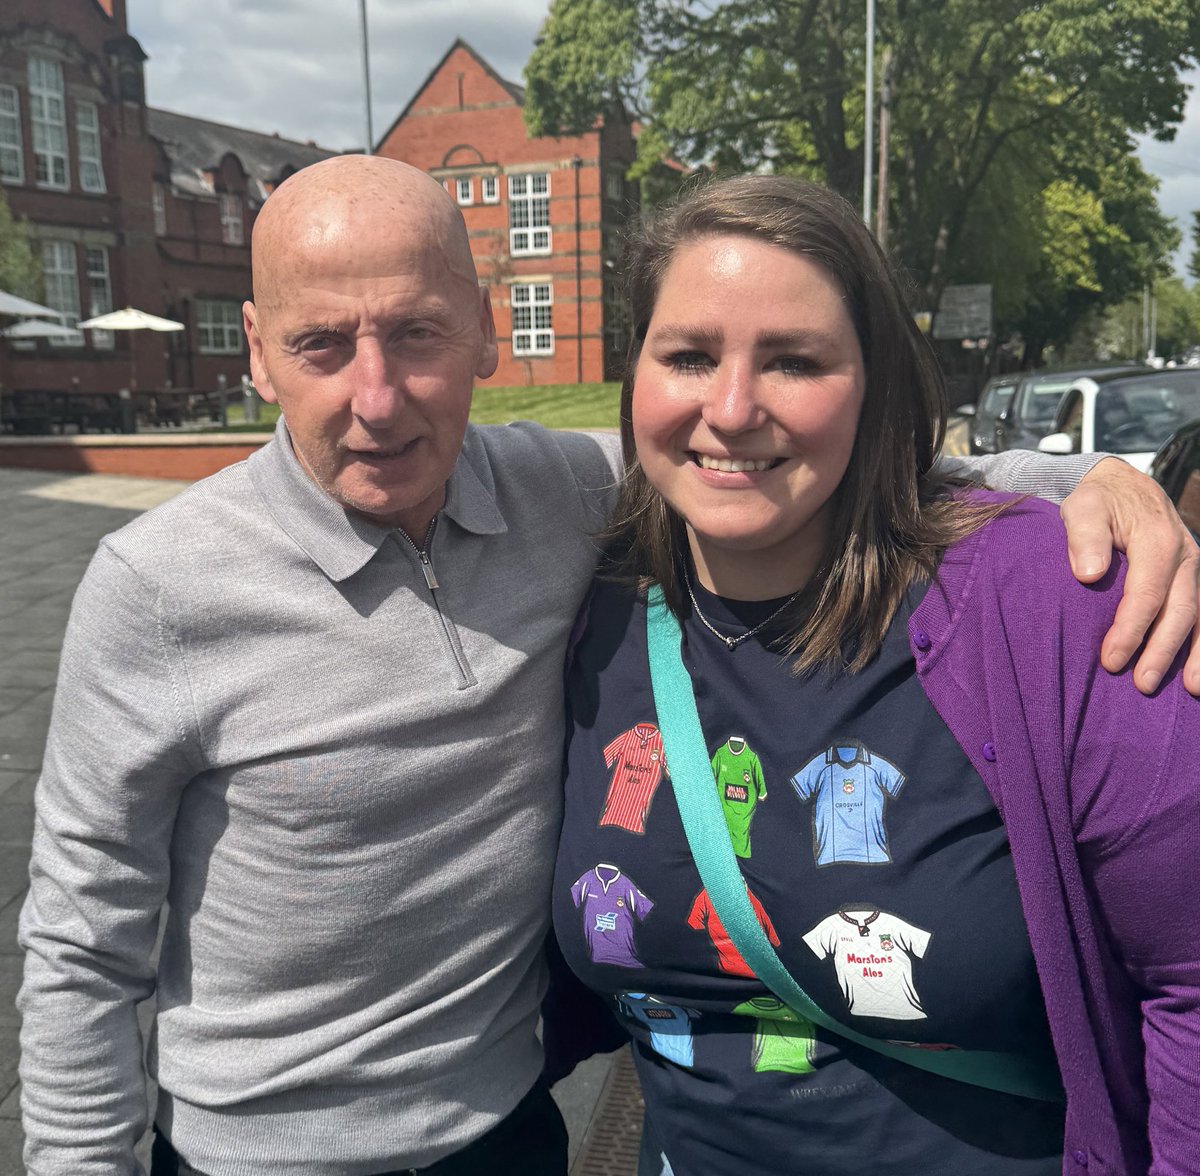 Walking through town and met a true @Wrexham_AFC legend!! Thank you @therealMickeyT for the photo and quick chat.